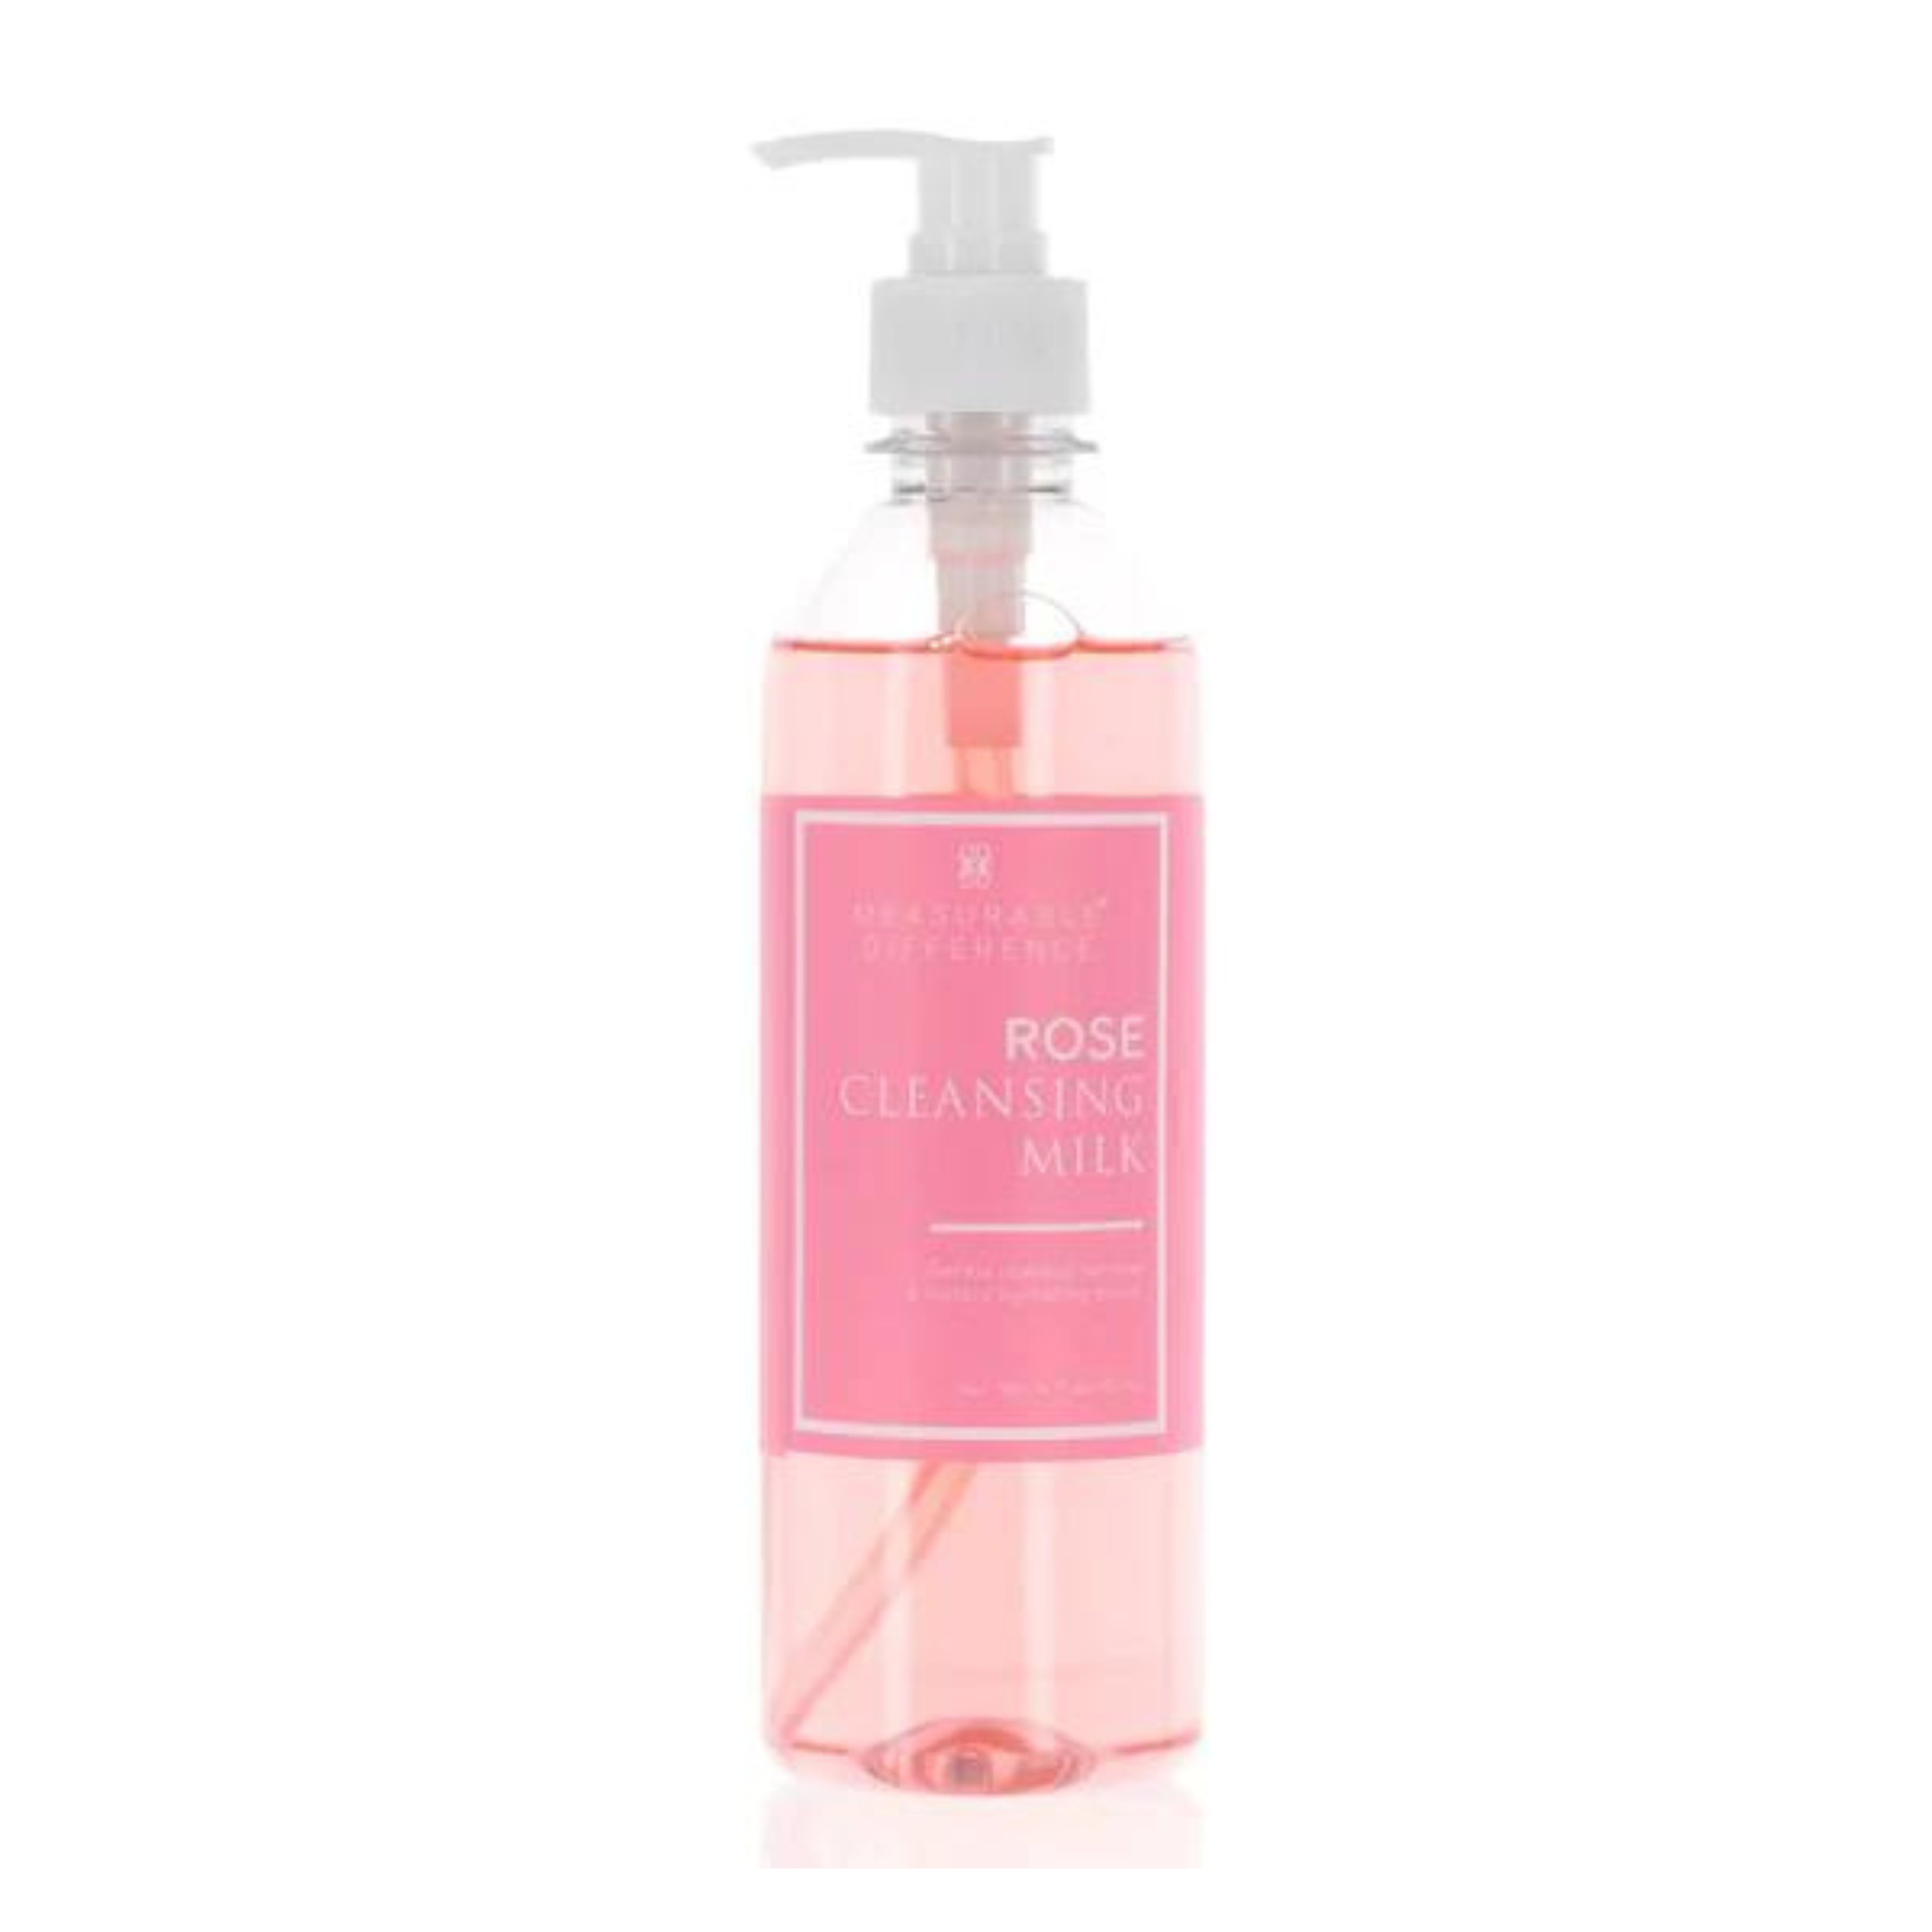 ROSE CLEANSING MILK MEASURABLE DIFFERENCE